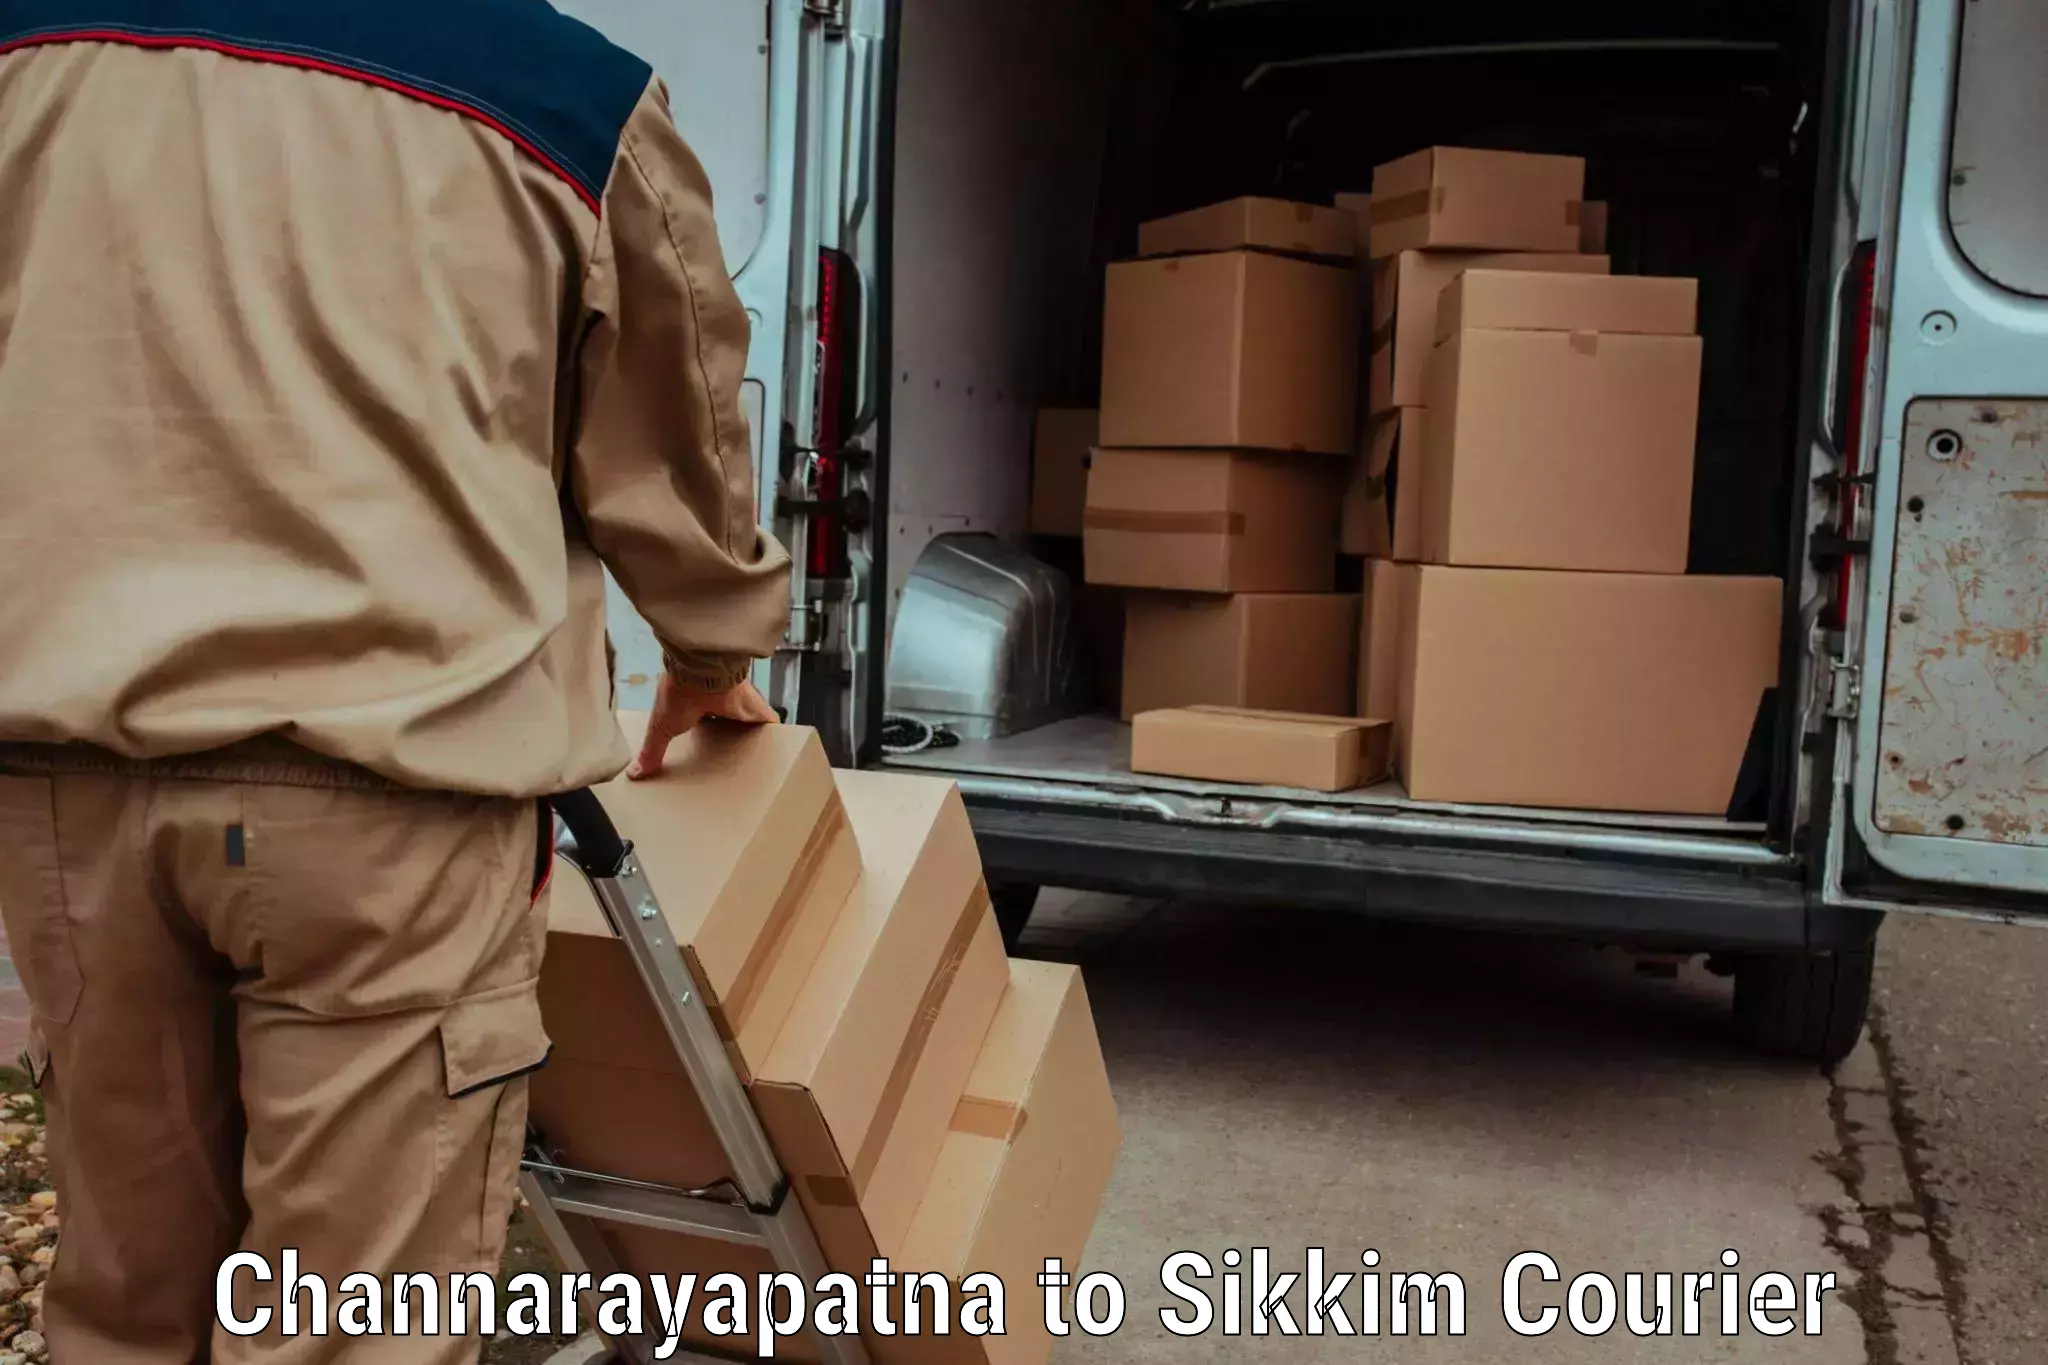 Residential courier service Channarayapatna to Pelling